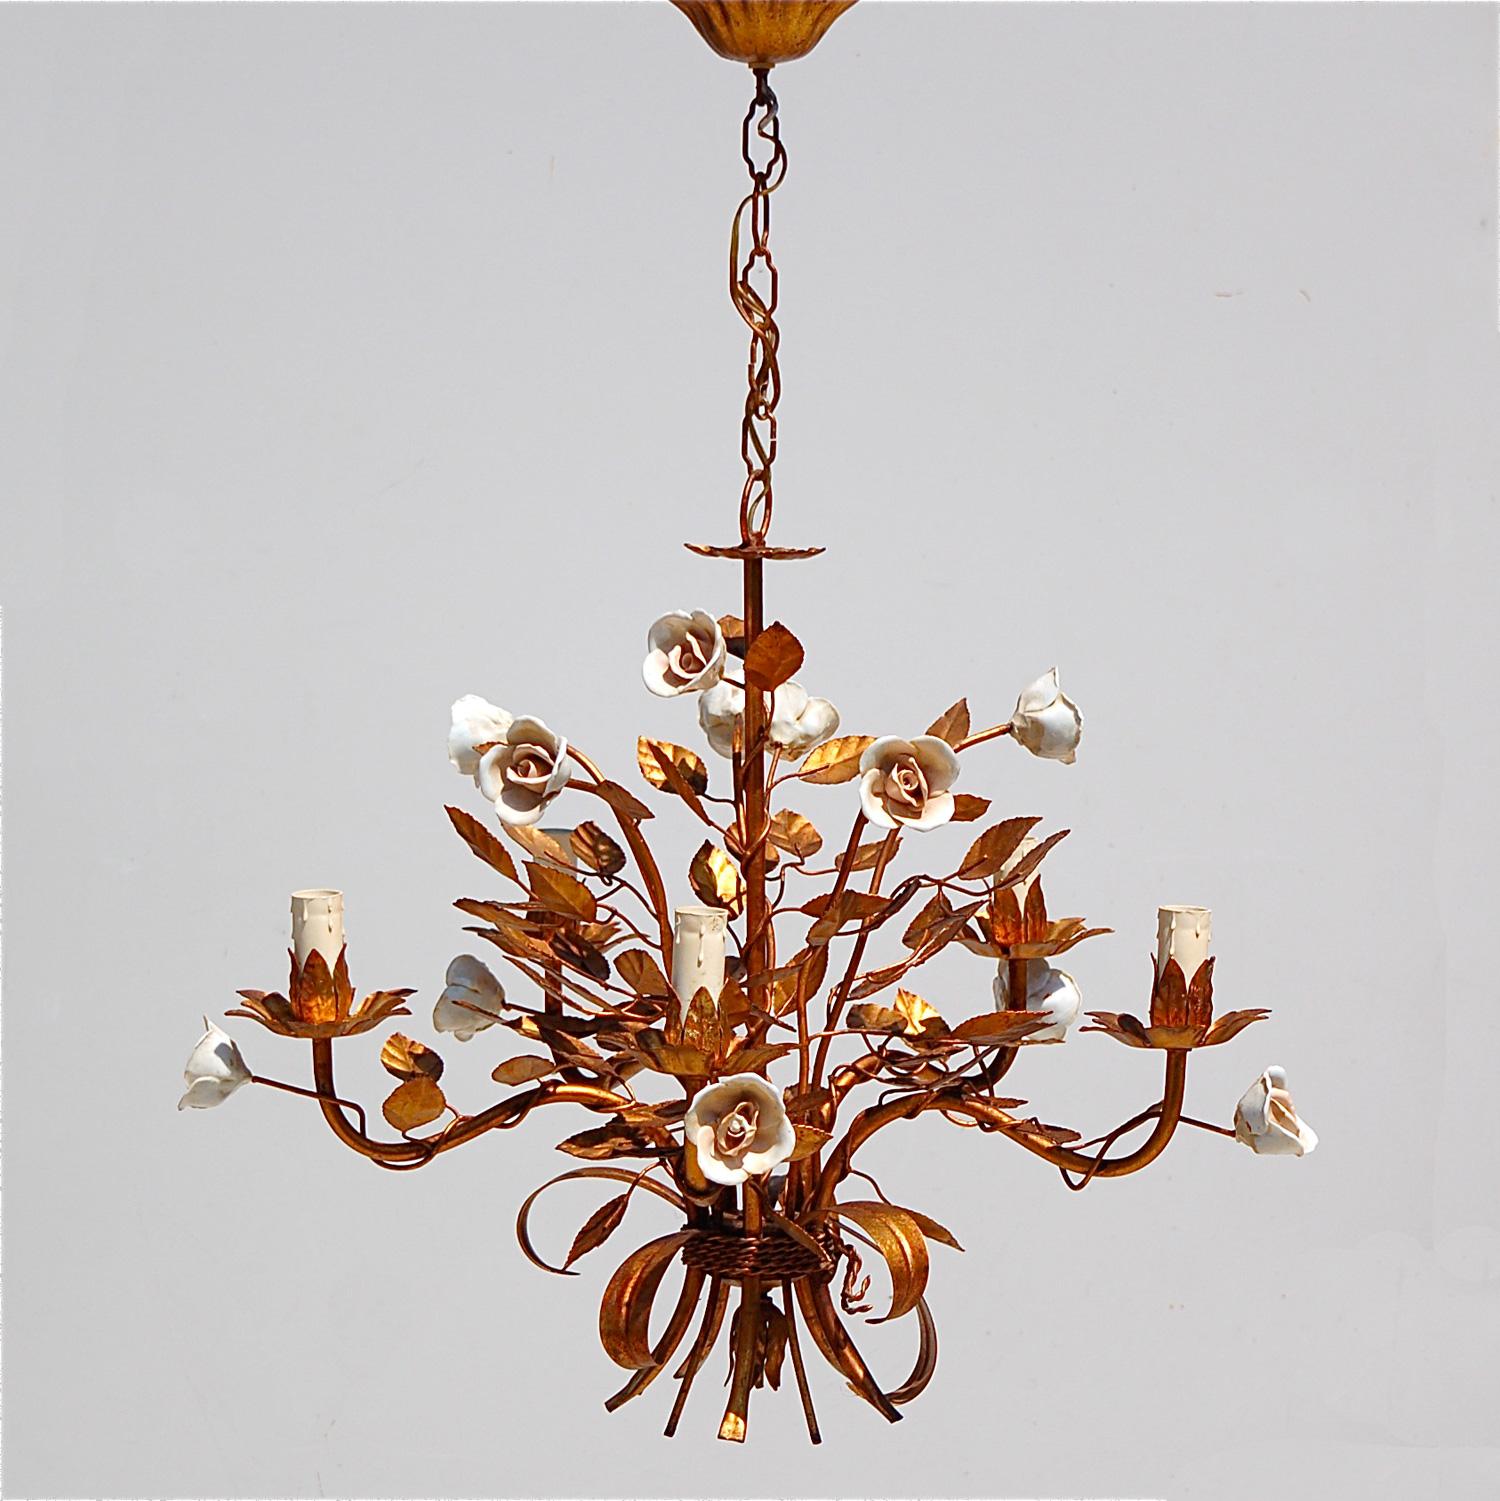 Alternative take on the Coco Chanel sheaf of wheat chandelier, this floral or rose tole pendant light is decorated with porcelain roses, leaves and has five arms with drip effect candle bulb holders. This gilt tole, ormelu, Florentine pendant light